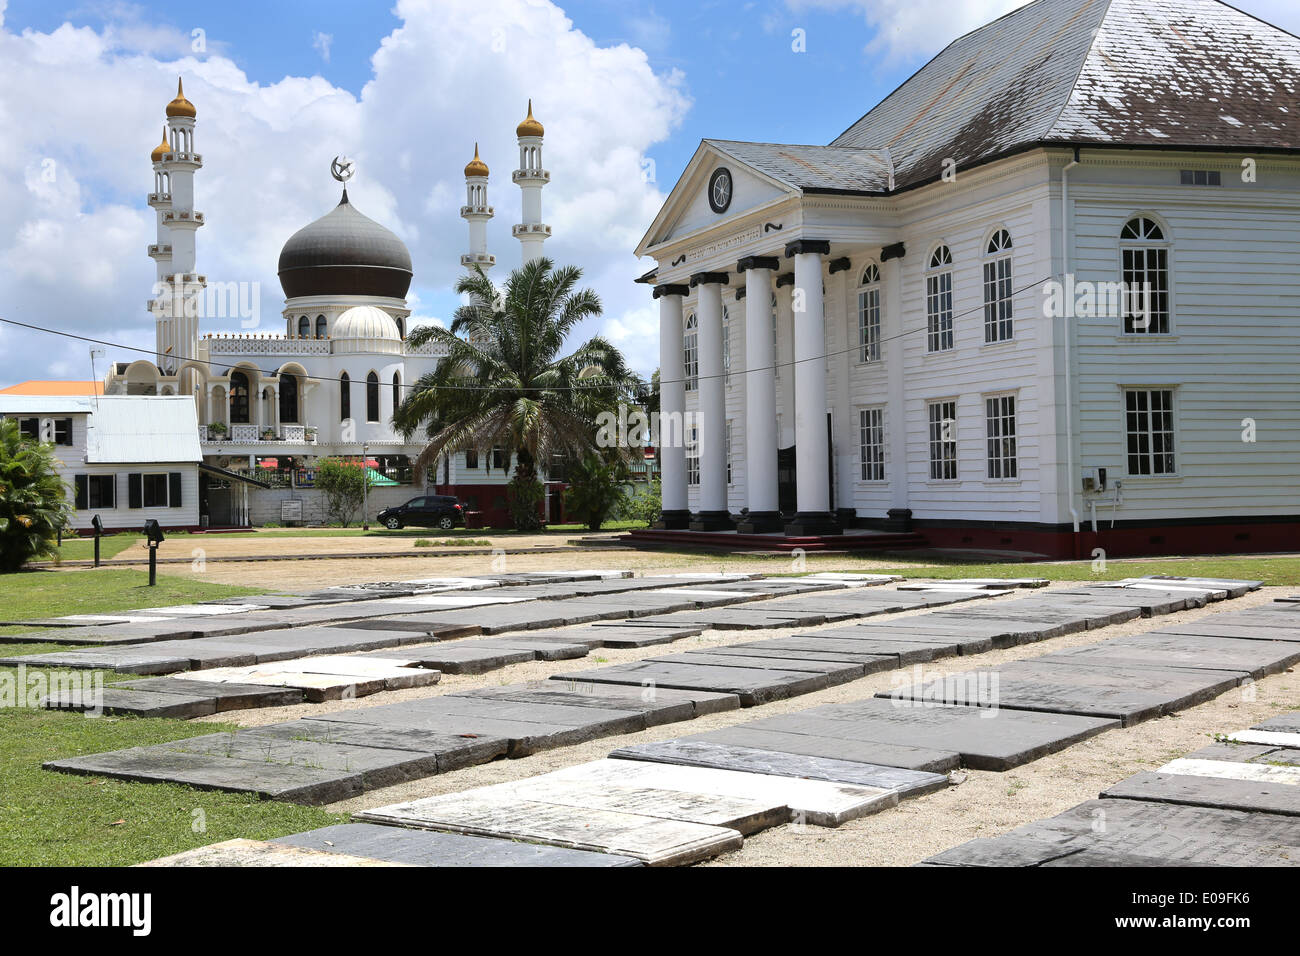 - Islamic mosque (left) and jewish synagogue standing side by side in Paramaribo, capital of Suriname, Latin America Stock Photo